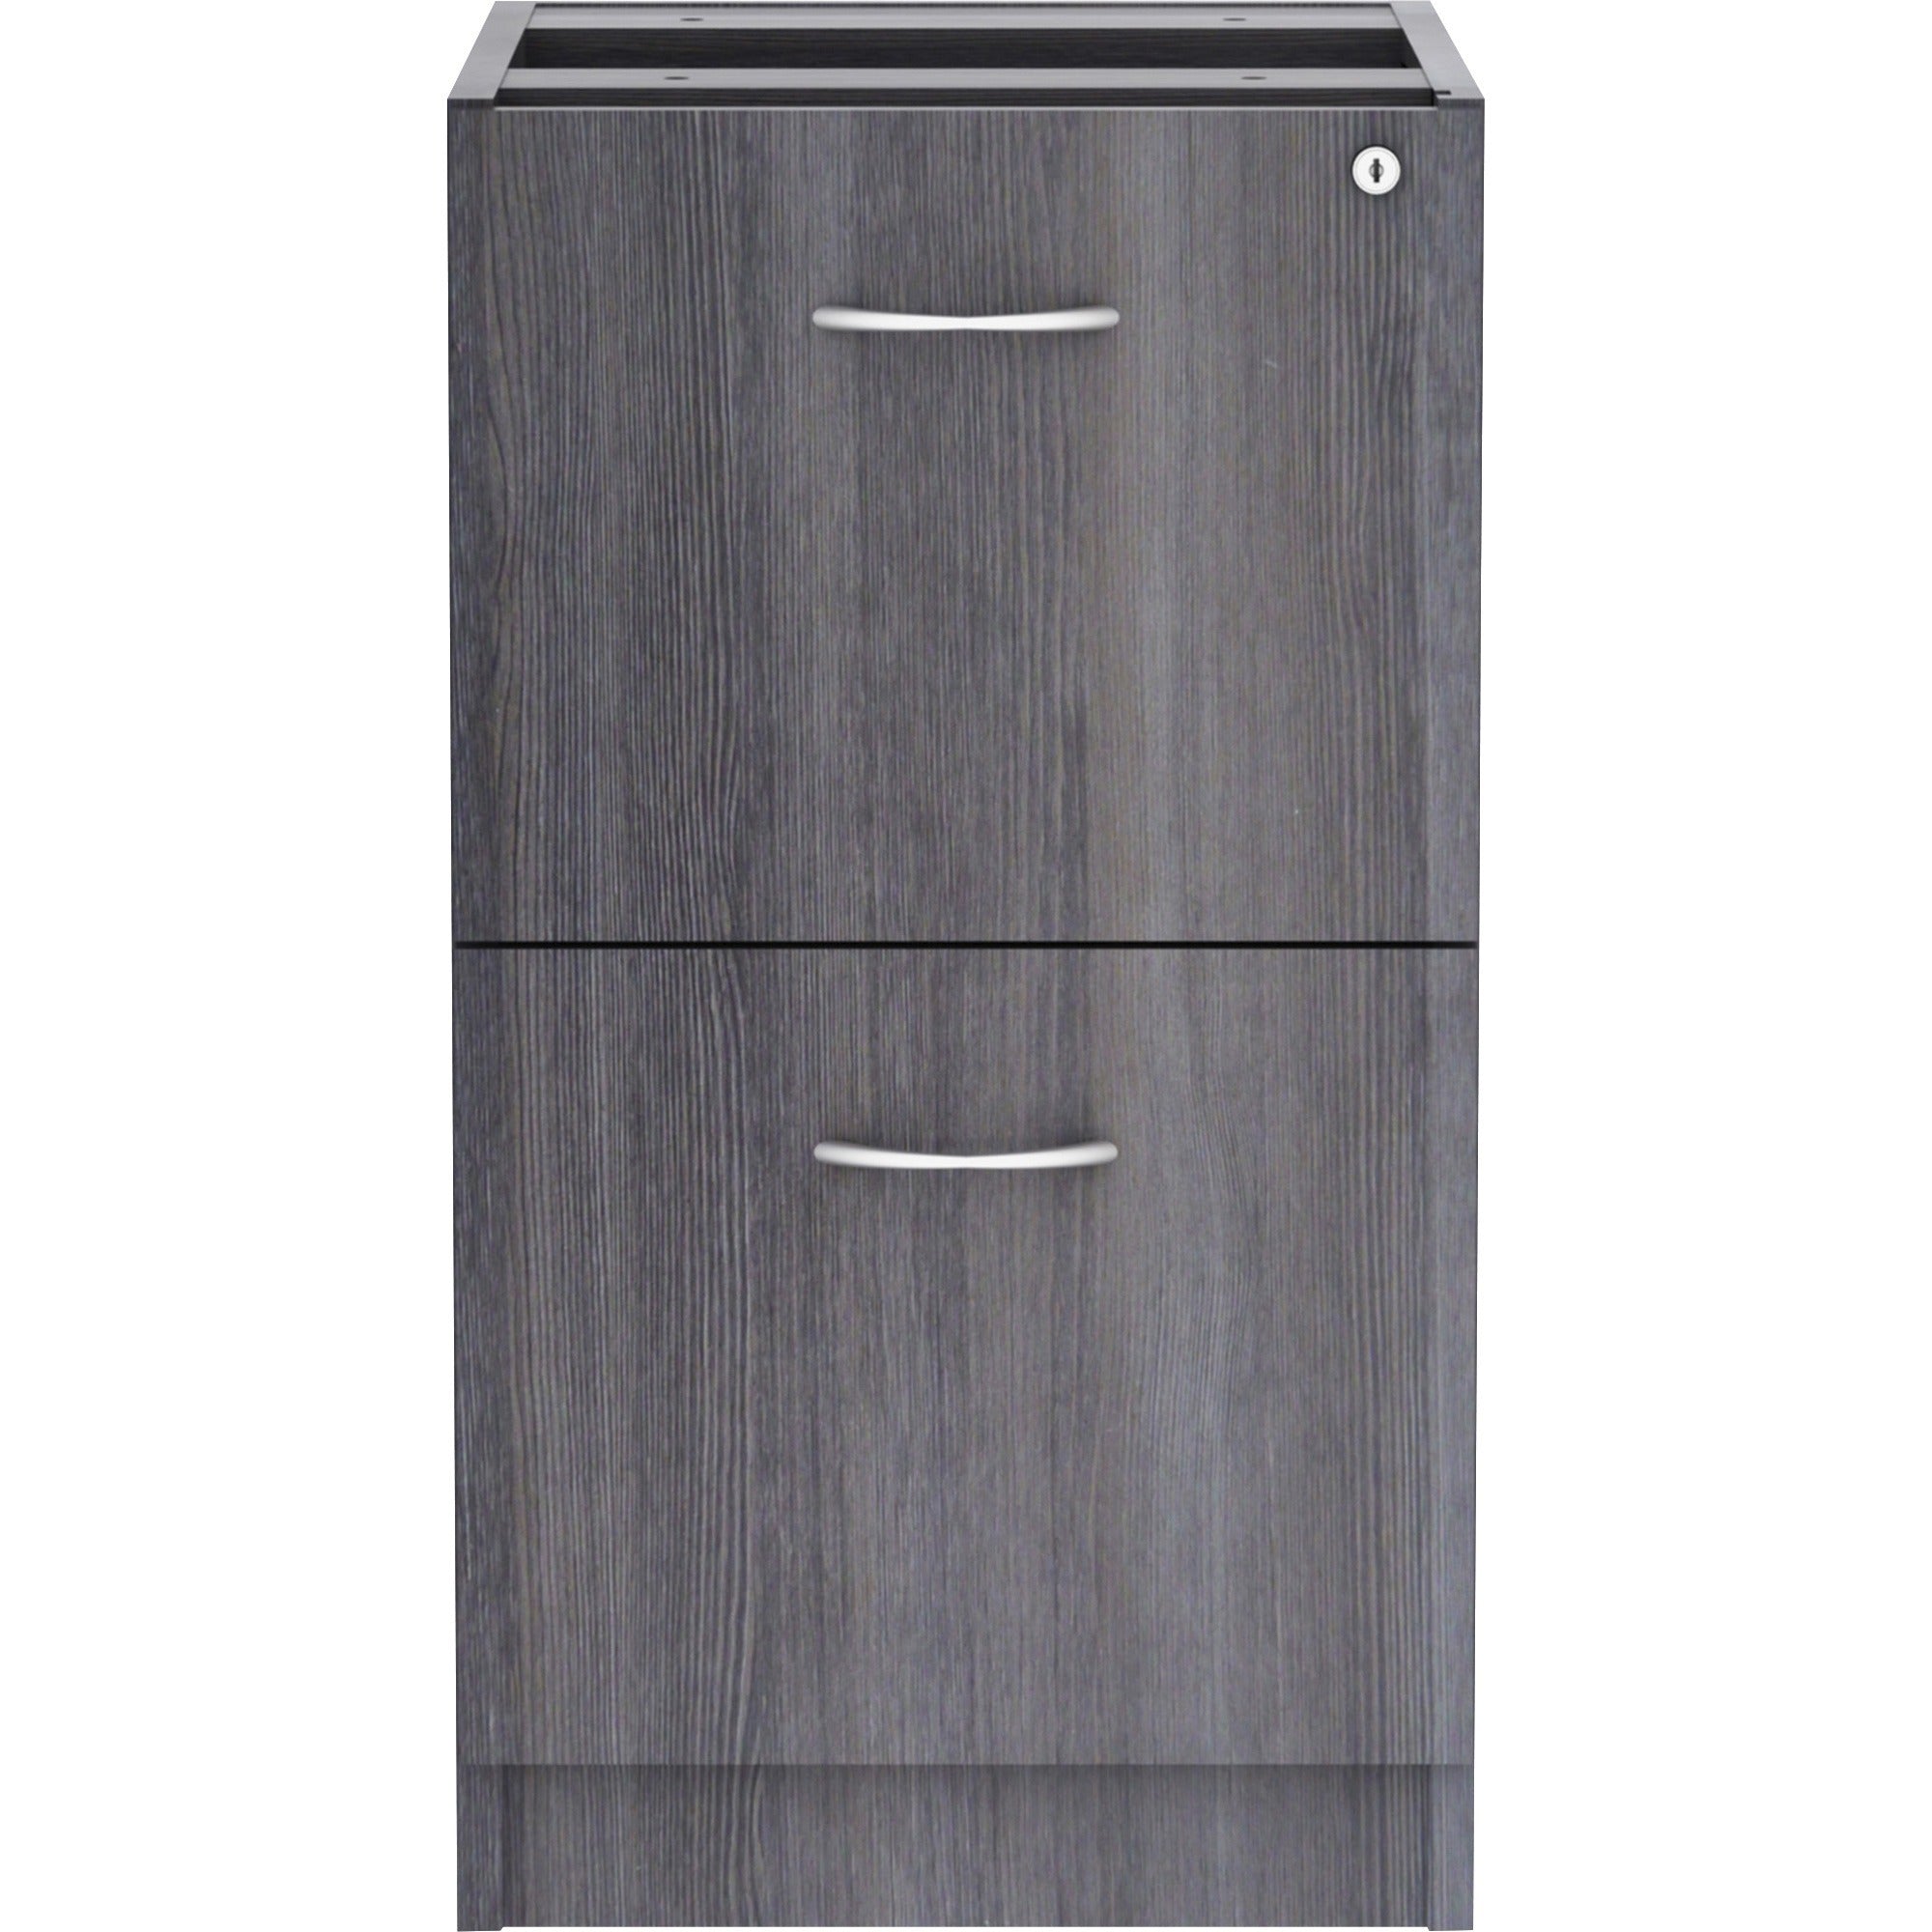 lorell-essentials-series-file-file-fixed-file-cabinet-16-x-22283-2-x-file-drawers-finish-laminate-weathered-charcoal-file-drawer_llr69559 - 2